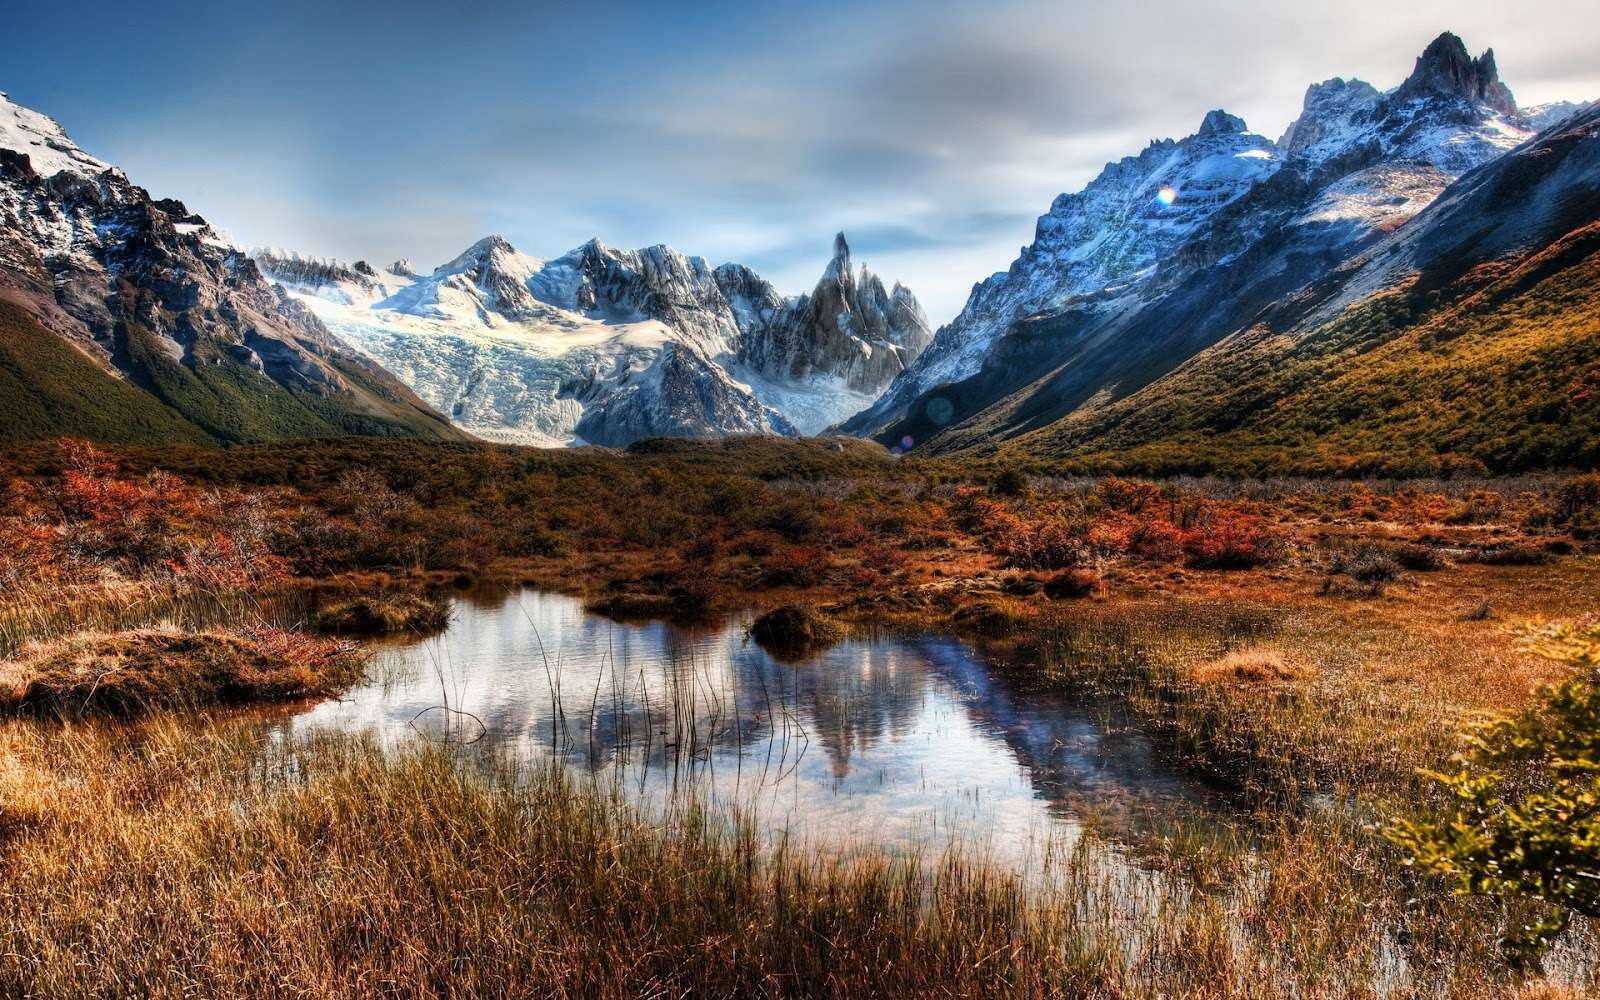 the beauty of the mountains puzzle online from photo